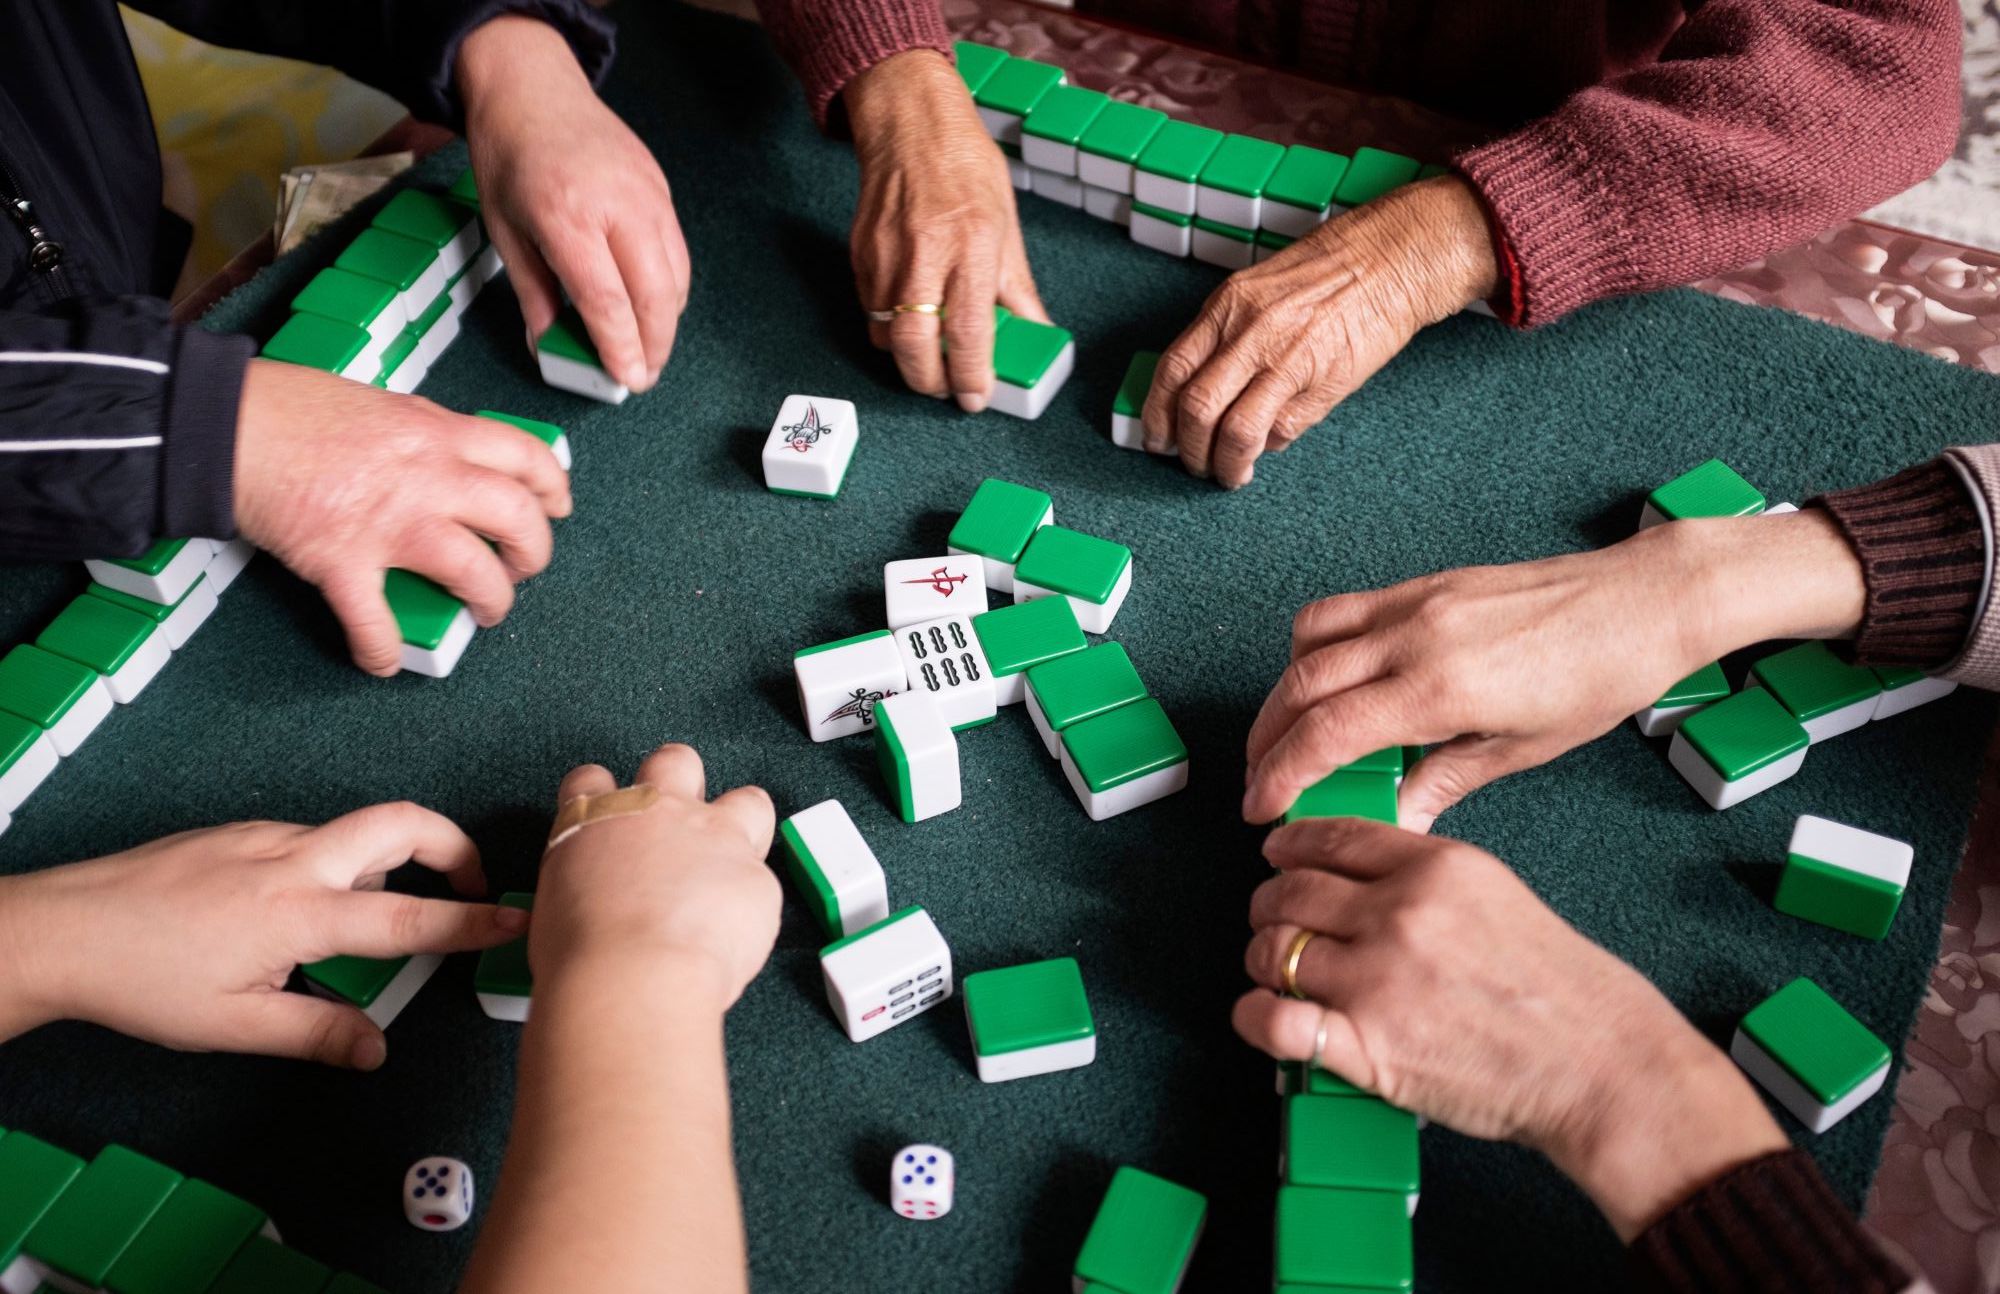 image depicts multiple people playing mahjong and picking up tiles